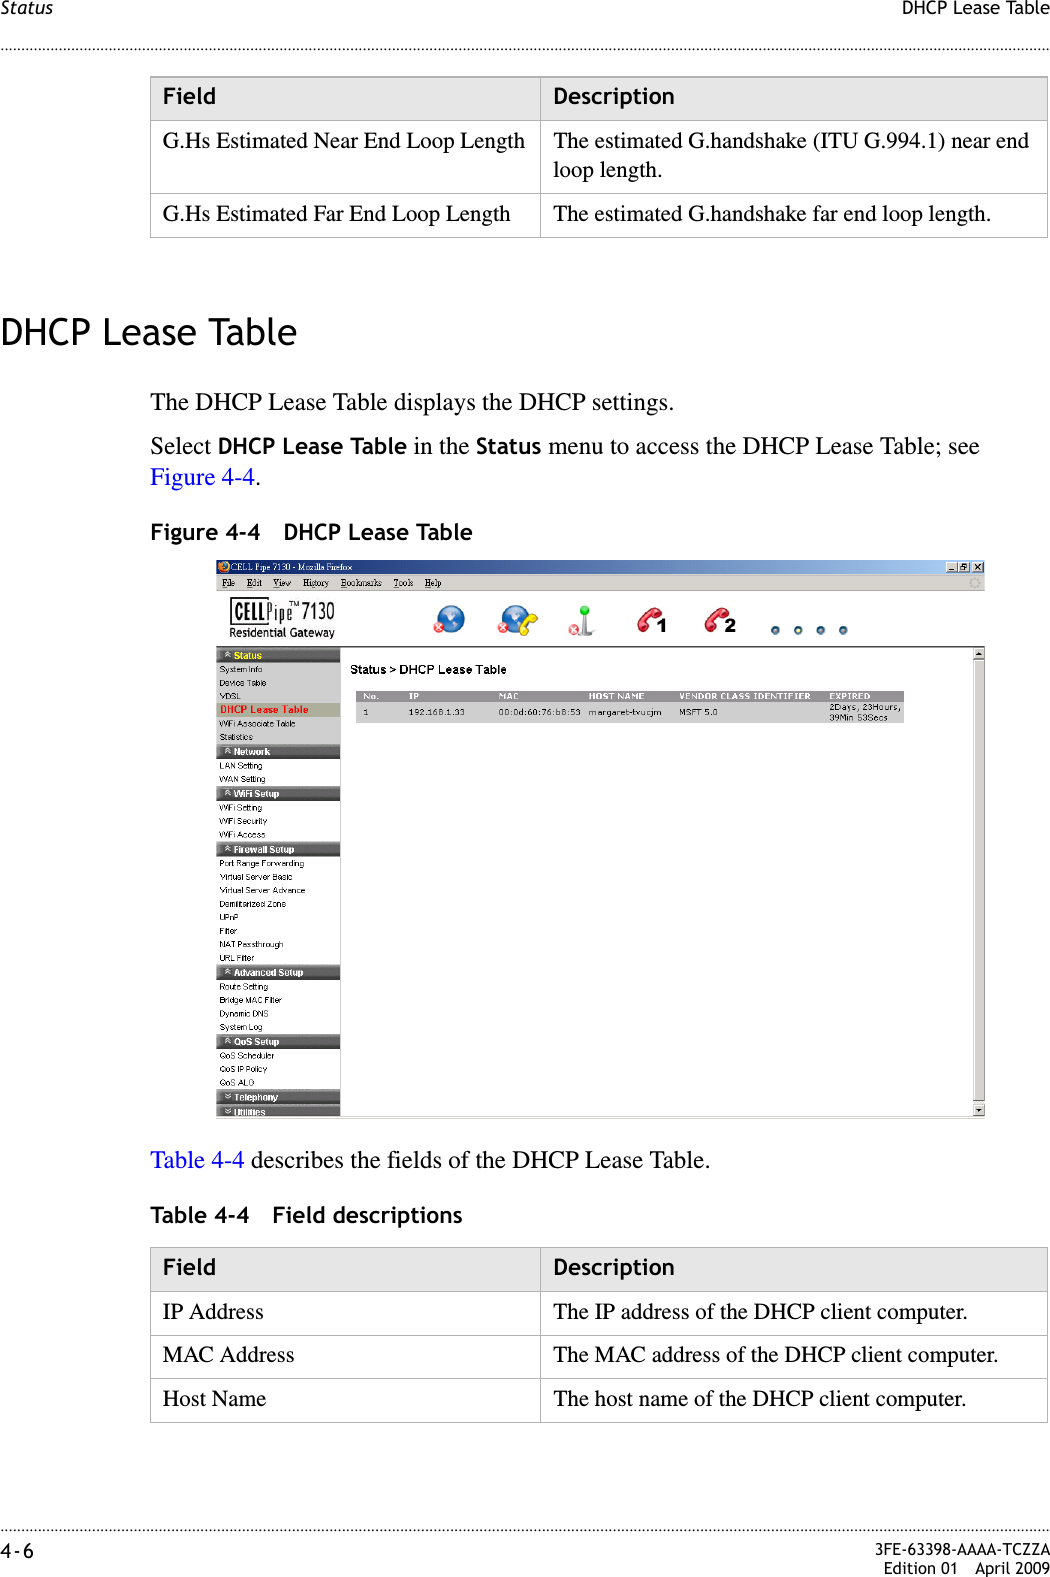 ............................................................................................................................................................................................................................................................DHCP Lease TableStatus4-6  3FE-63398-AAAA-TCZZAEdition 01 April 2009............................................................................................................................................................................................................................................................DHCP Lease TableThe DHCP Lease Table displays the DHCP settings.Select DHCP Lease Table in the Status menu to access the DHCP Lease Table; see Figure 4-4.Figure 4-4 DHCP Lease TableTable 4-4 describes the fields of the DHCP Lease Table.Table 4-4 Field descriptionsG.Hs Estimated Near End Loop Length The estimated G.handshake (ITU G.994.1) near end loop length.G.Hs Estimated Far End Loop Length The estimated G.handshake far end loop length.Field DescriptionField DescriptionIP Address The IP address of the DHCP client computer.MAC Address The MAC address of the DHCP client computer.Host Name The host name of the DHCP client computer.